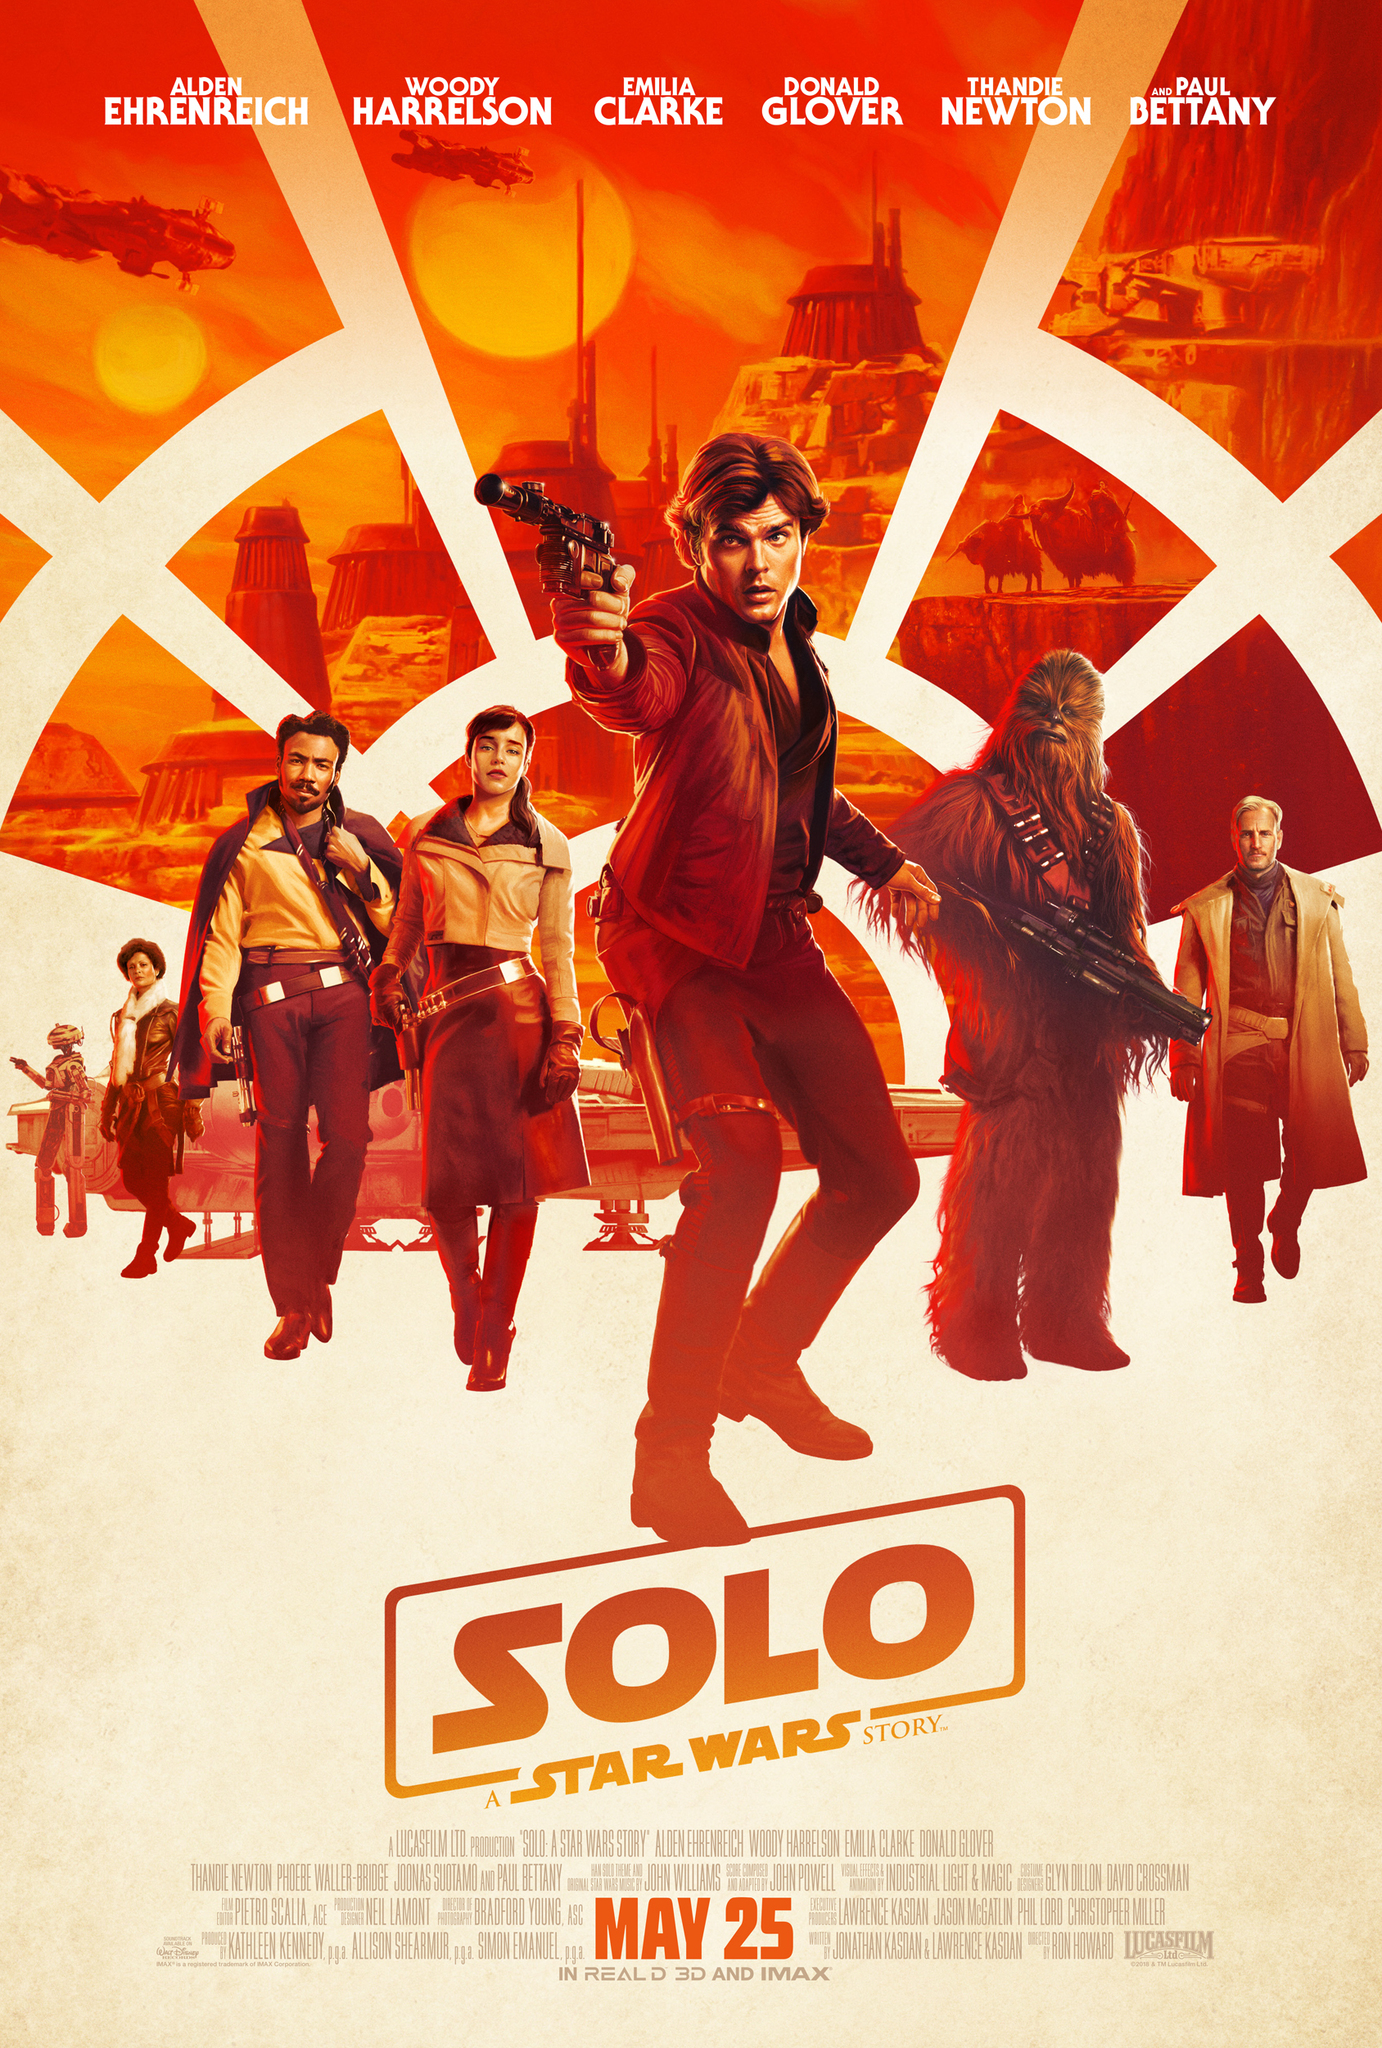 Star Wars Film - Solo Poster